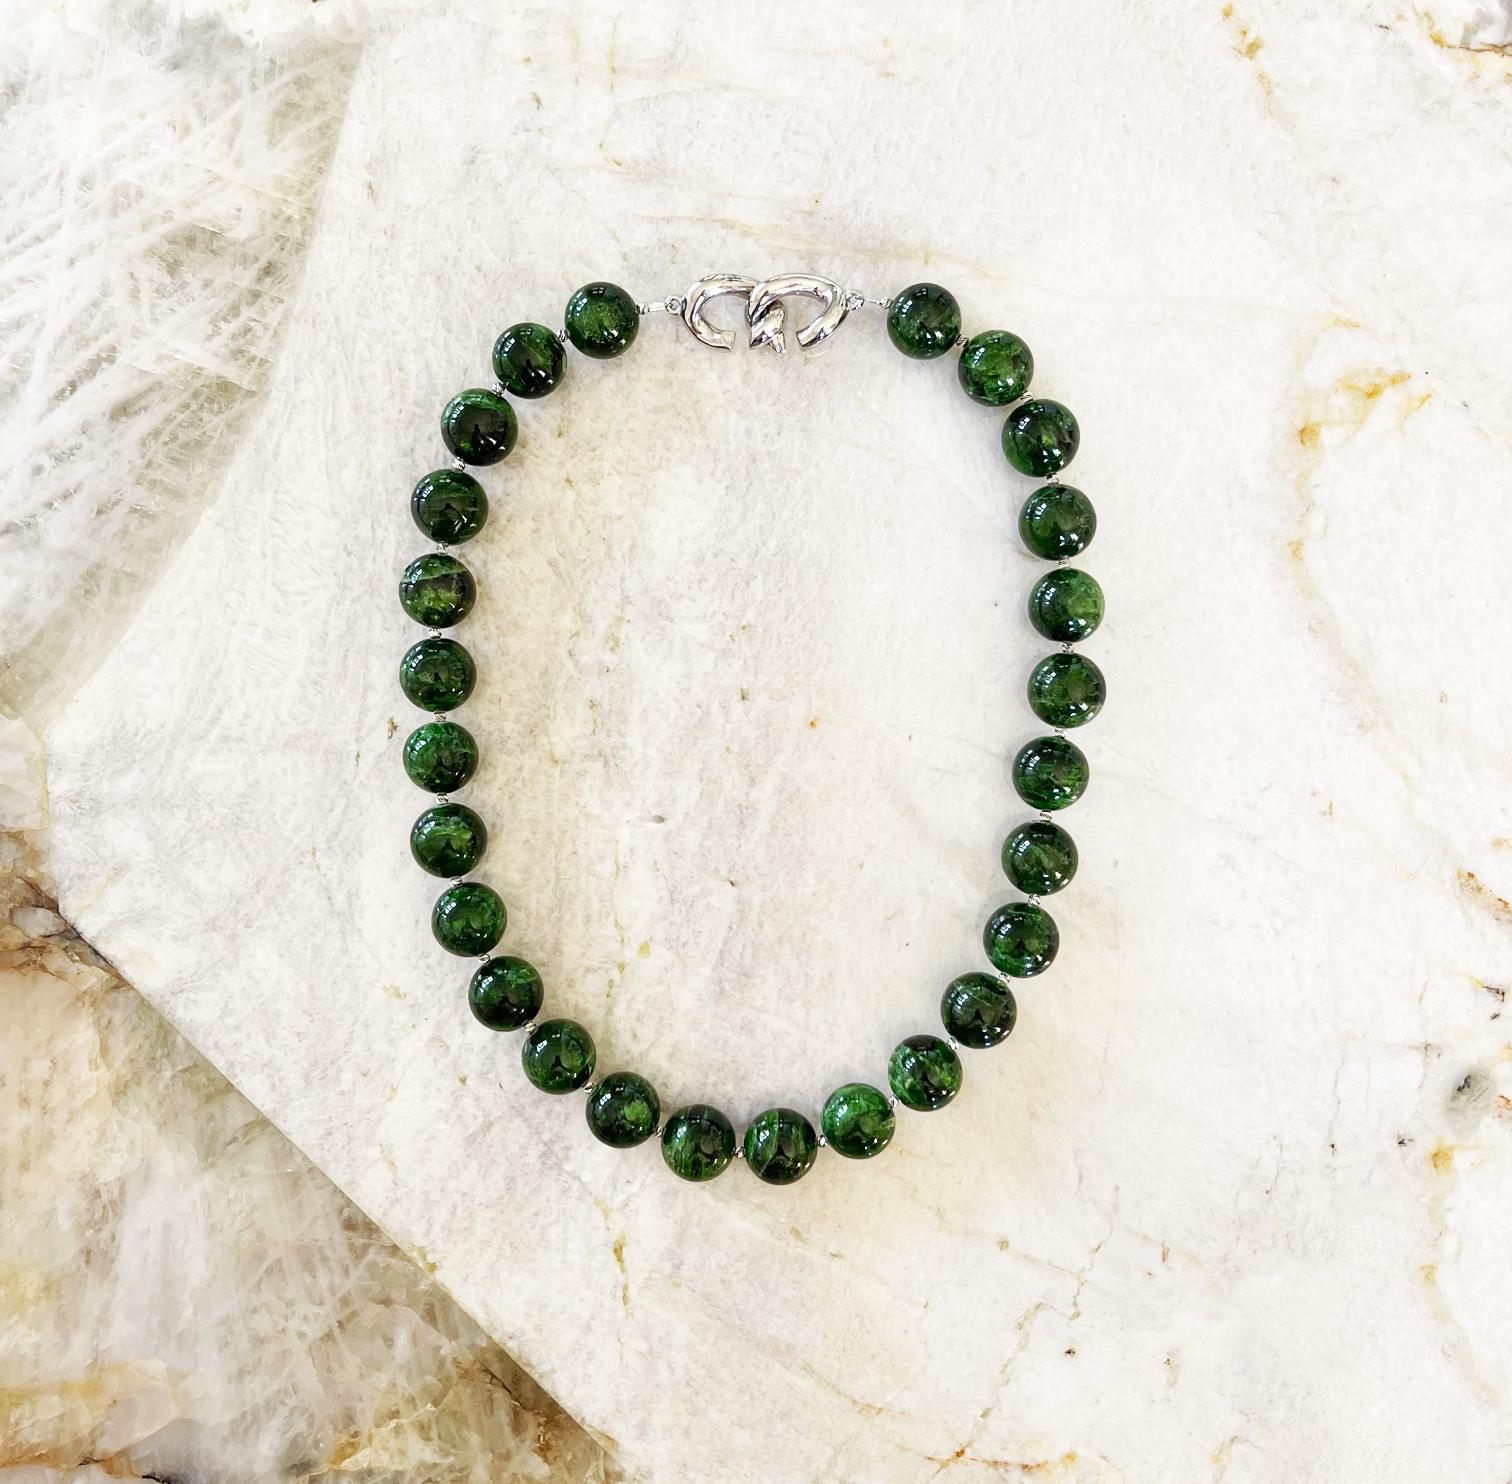 Chrome Diopside Siberian Emerald Intense Green 15mm Round Beaded Necklace For Sale 3